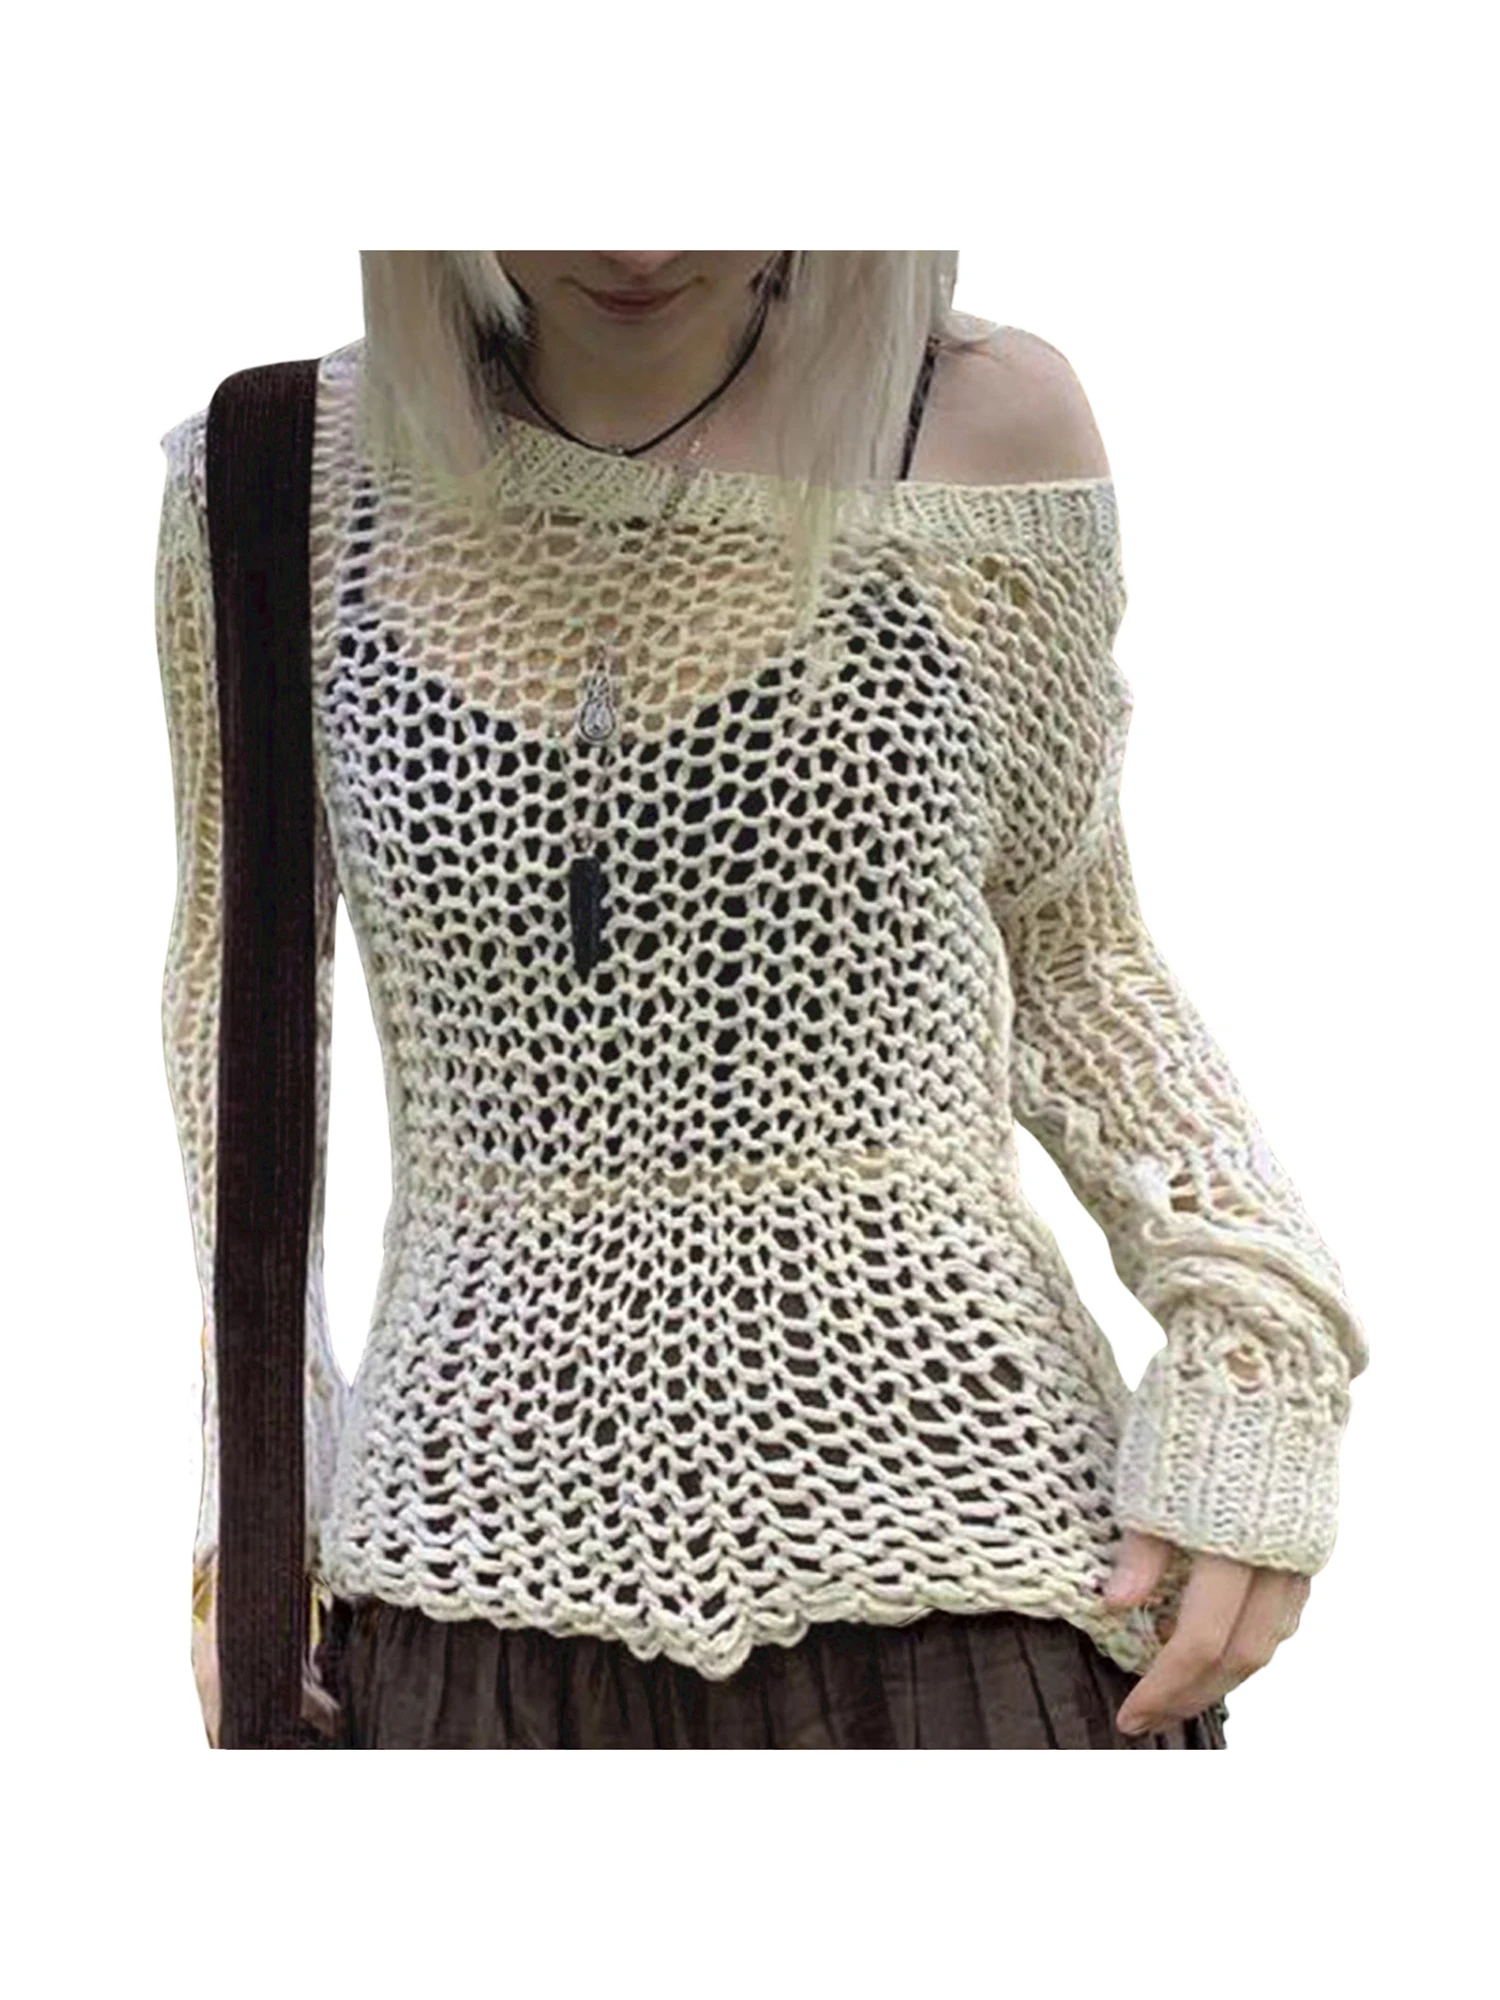 Women s Crochet Top Long Sleeve Hollow Out Cropped Knit Top Fishnet See Through Shirt Mesh Swimsuit Bikini Cover Ups